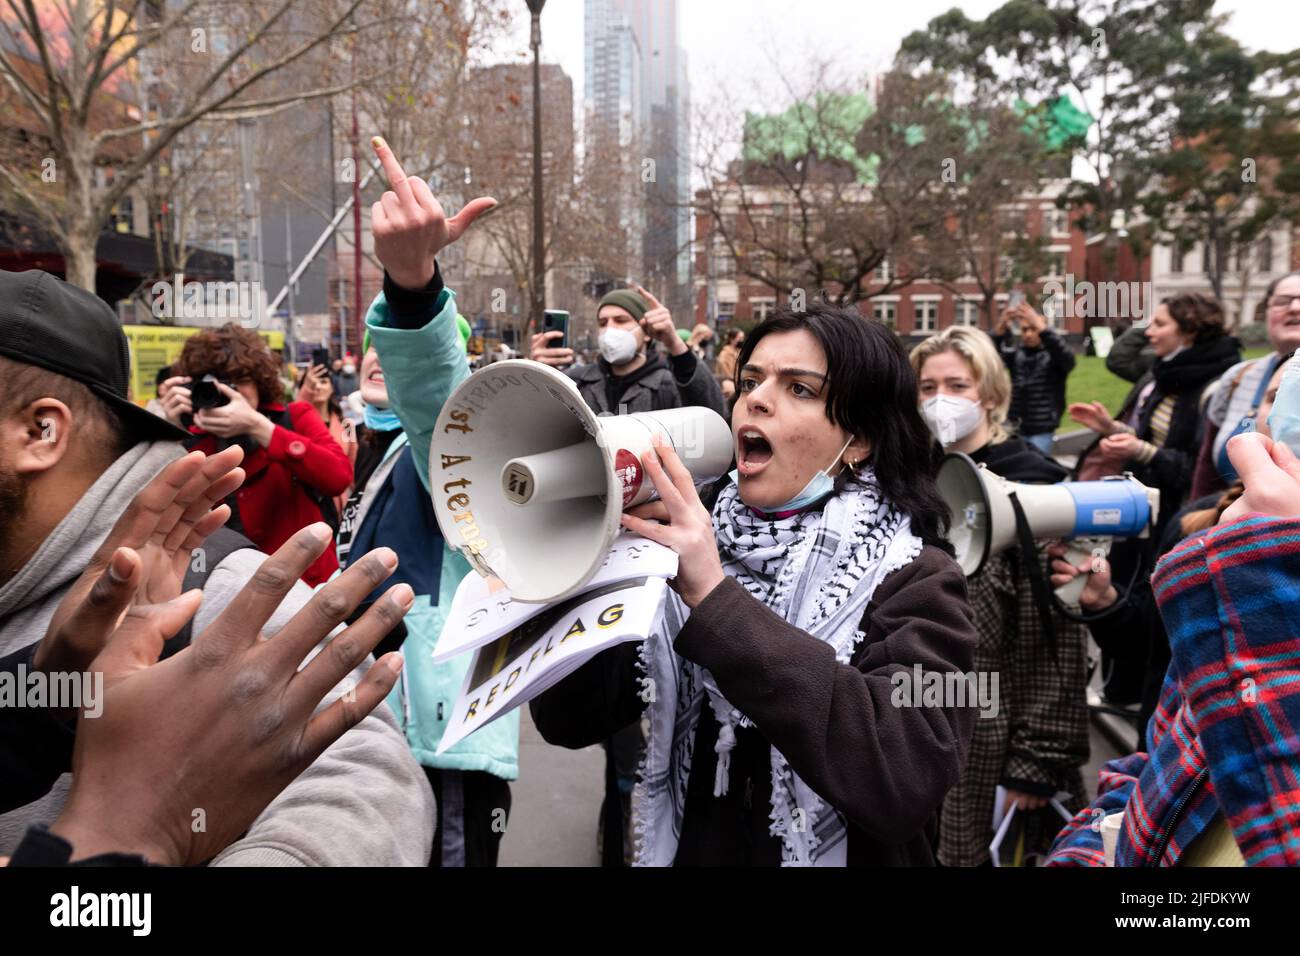 Melbourne, Australia, 2 July, 2022. Pro-choice demonstrators chant through megaphones during a pro-choice protest in Melbourne that was held in reaction to the US Supreme Court's decision to overturn Roe v. Wade and abolish the constitutional right to abortion in the USA. Credit: Michael Currie/Speed Media/Alamy Live News Stock Photo